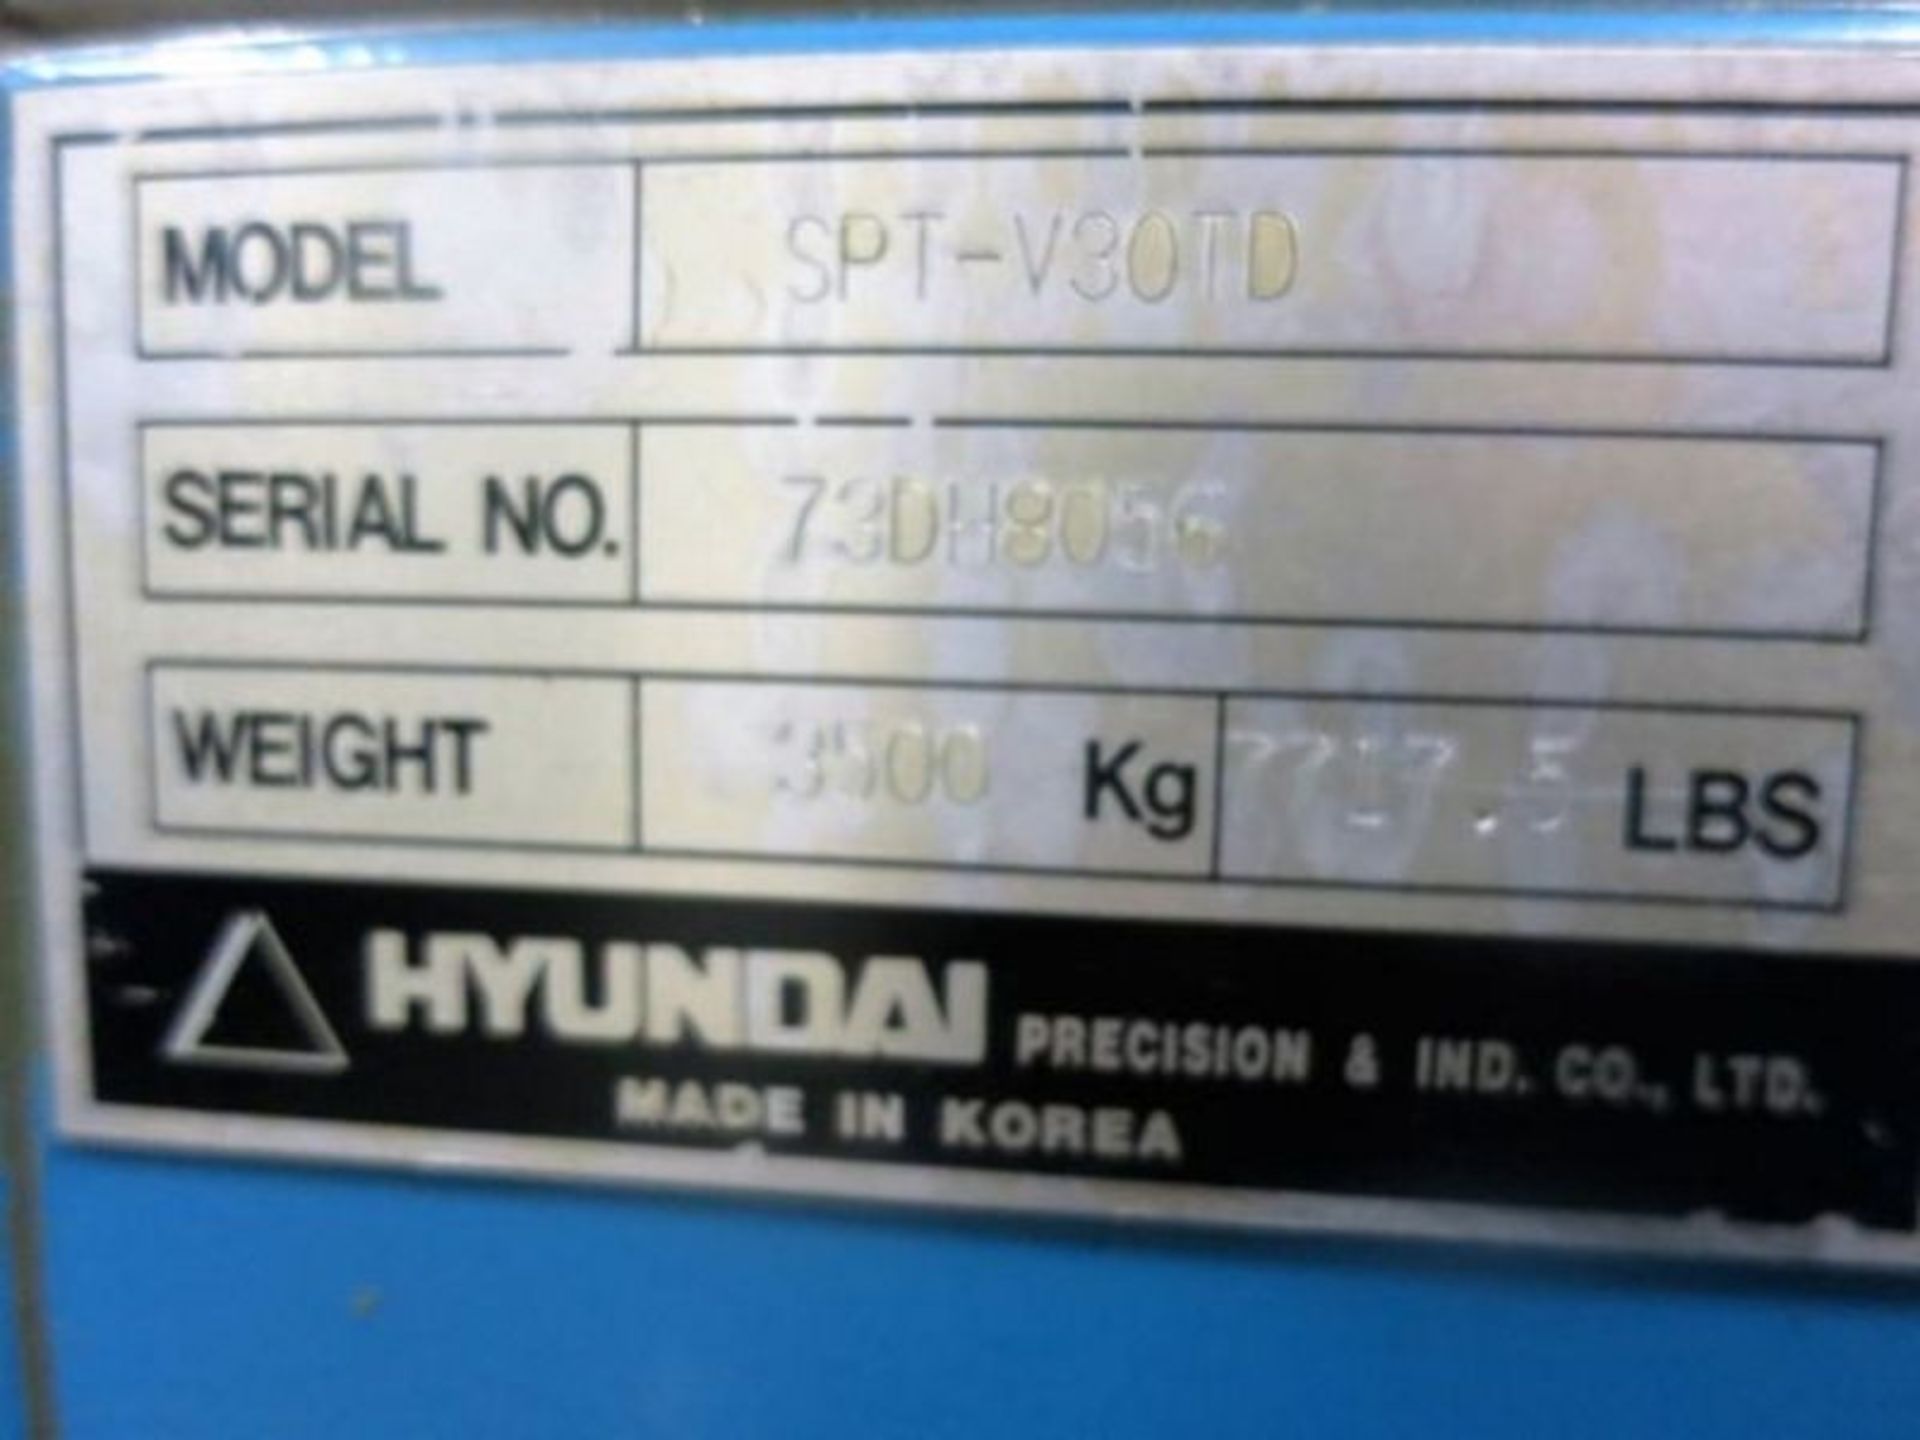 Hyundai SPTV30TD CNC Tapmill Center with Pallet Changer, S/N 73H8056, New 1999 General - Image 9 of 10